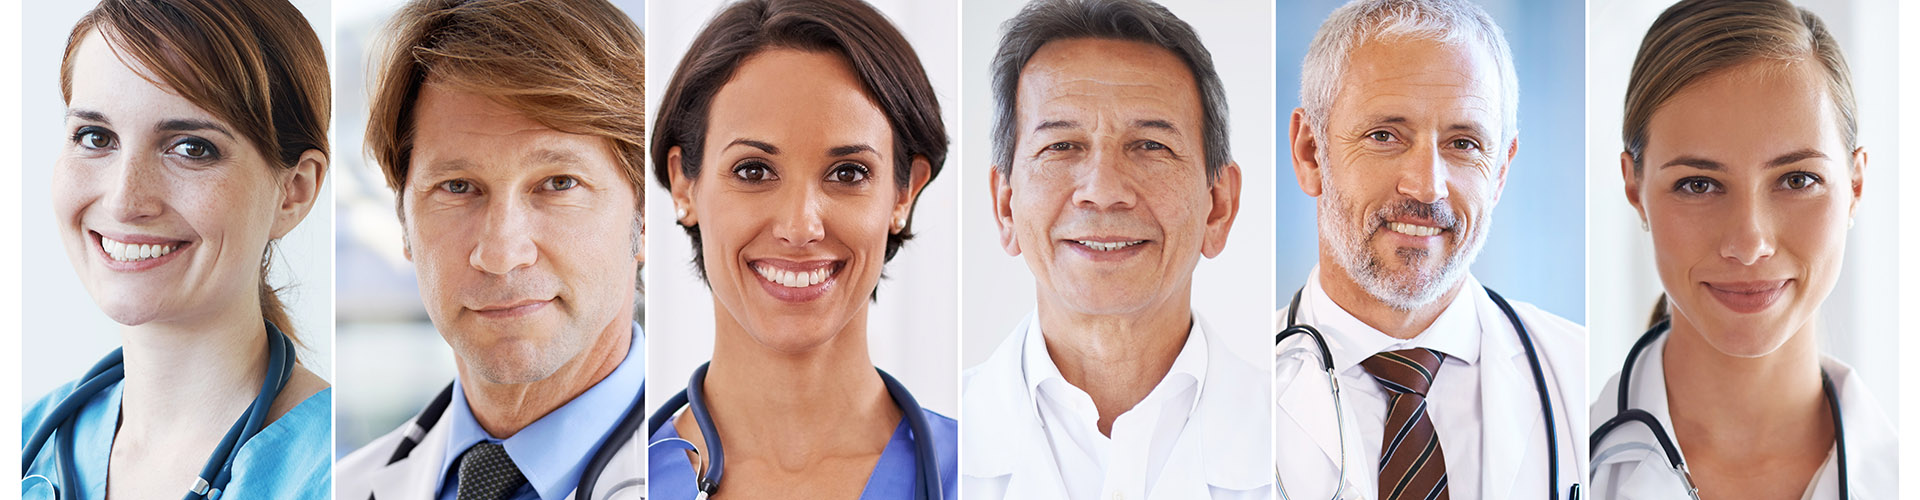 faces of a variety of healthcare professionals